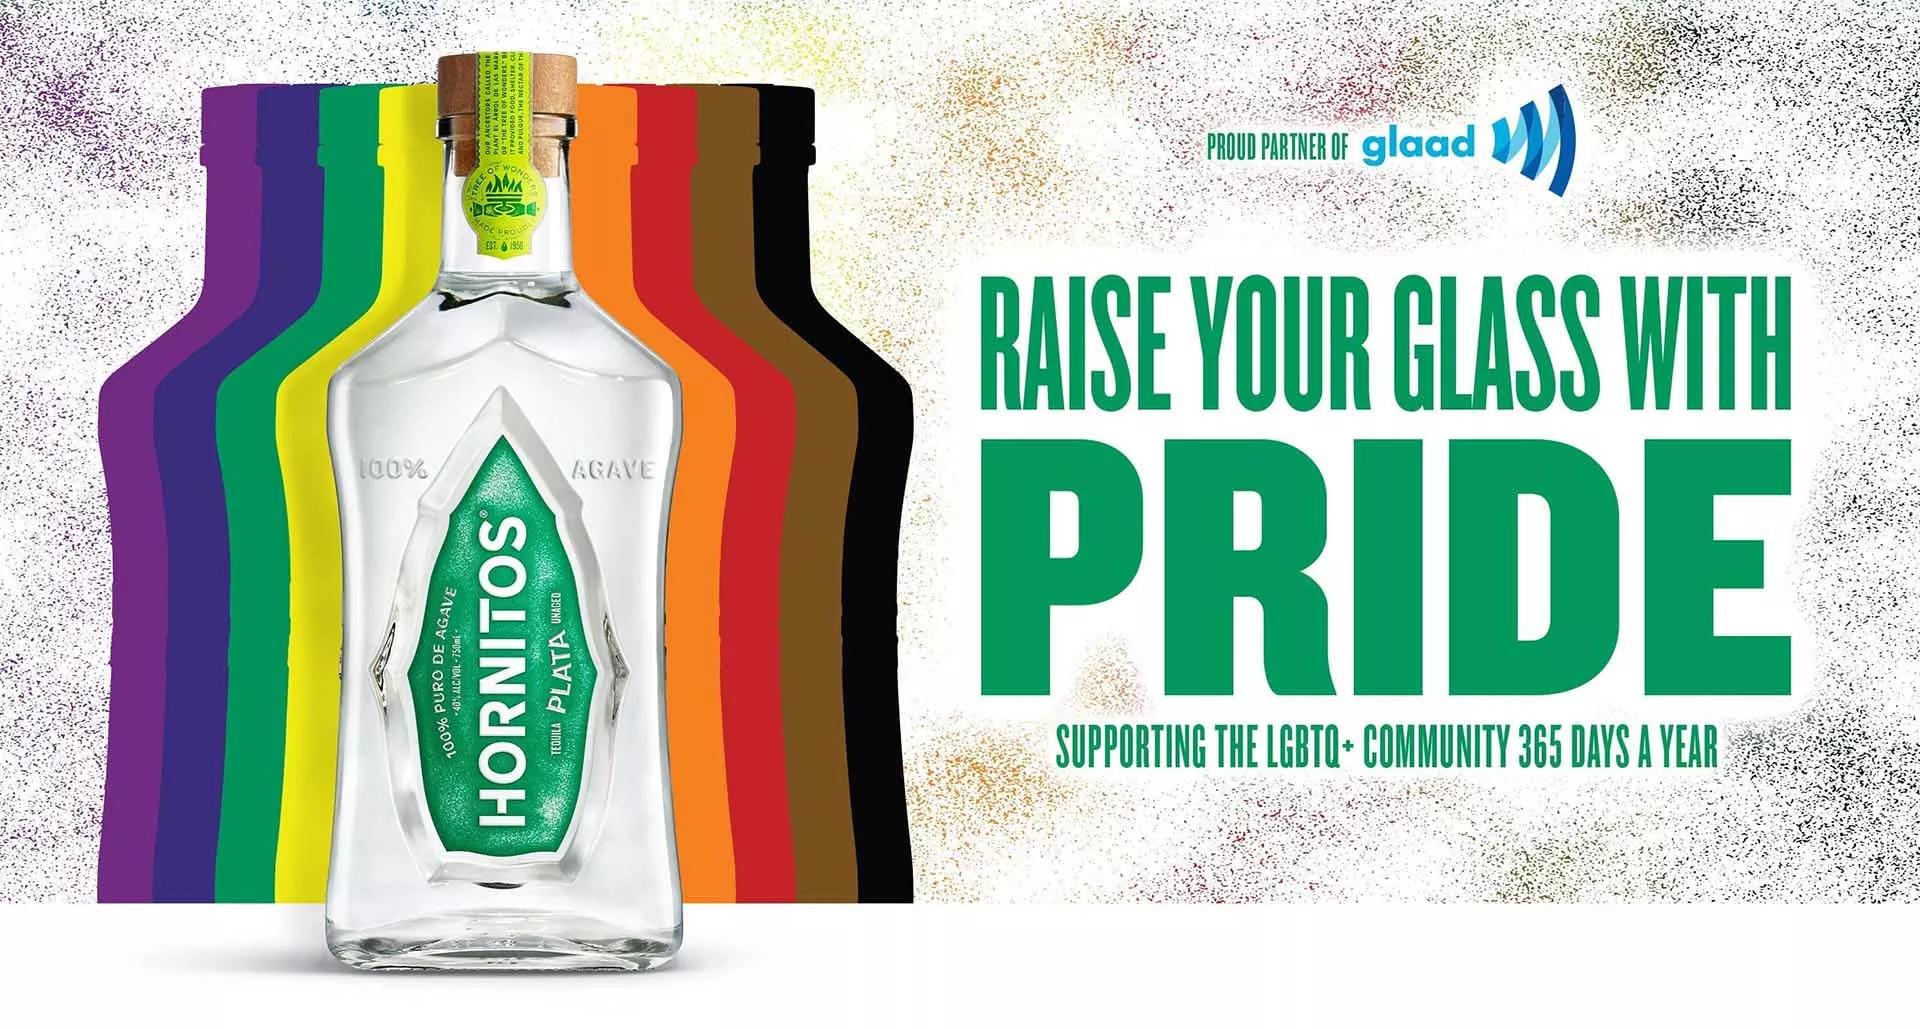 Hornitos Raise Your Glass With PRIDE 365 banner poster